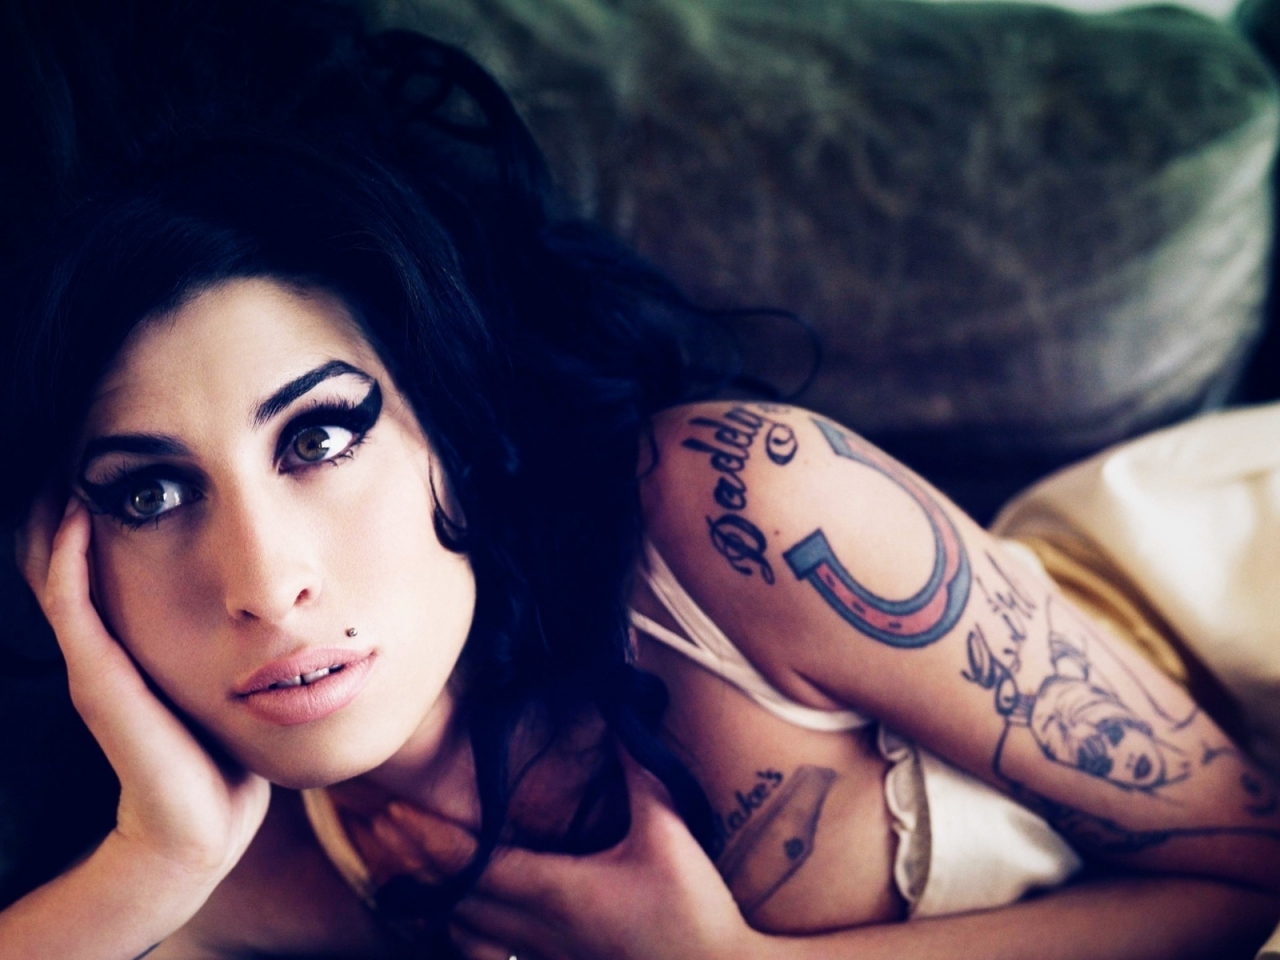 Beautiful Amy Winehouse for 1280 x 960 resolution